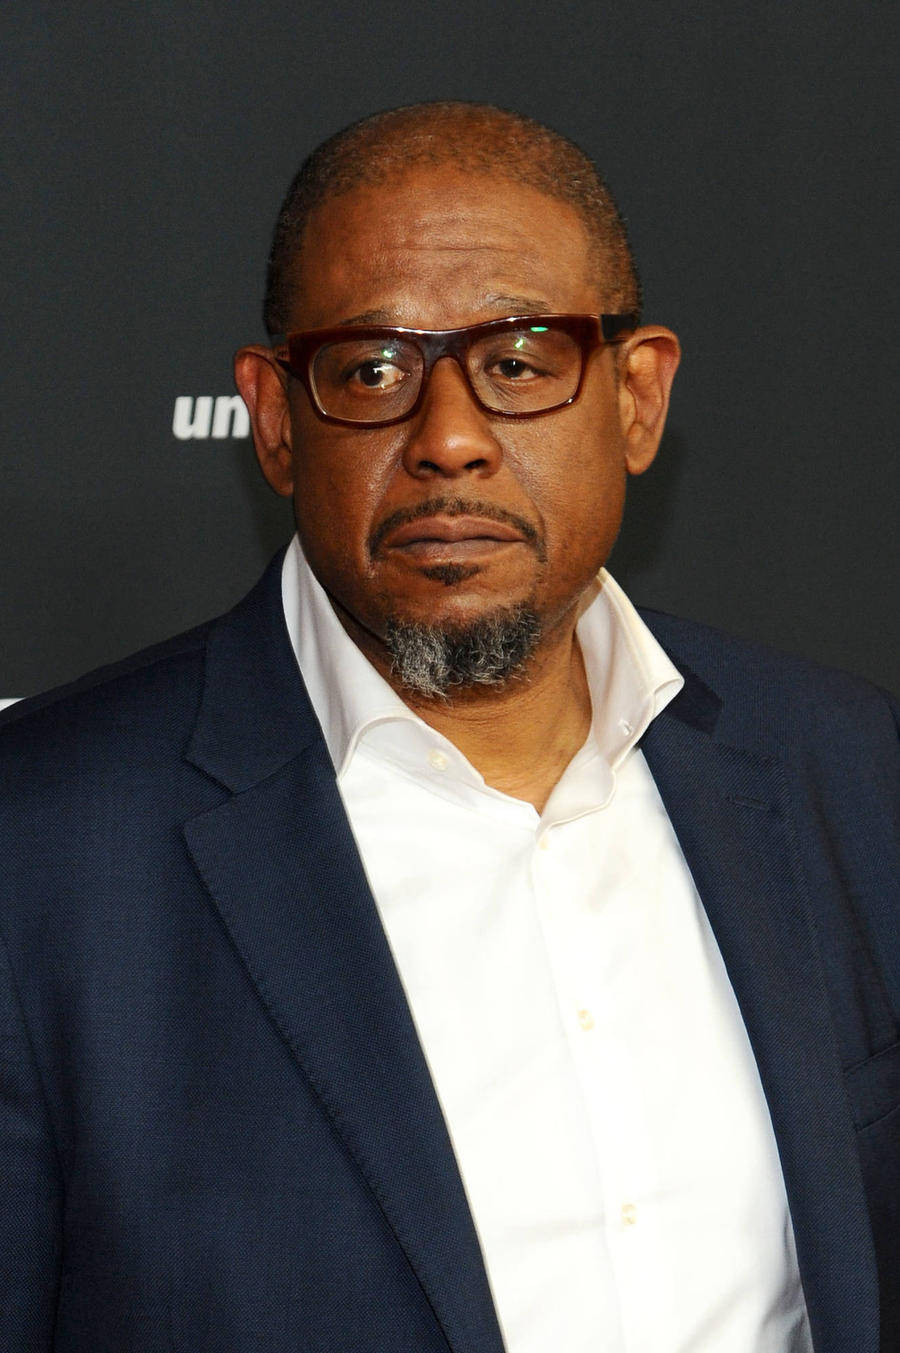 Introspective Forest Whitaker in deep thought. Wallpaper